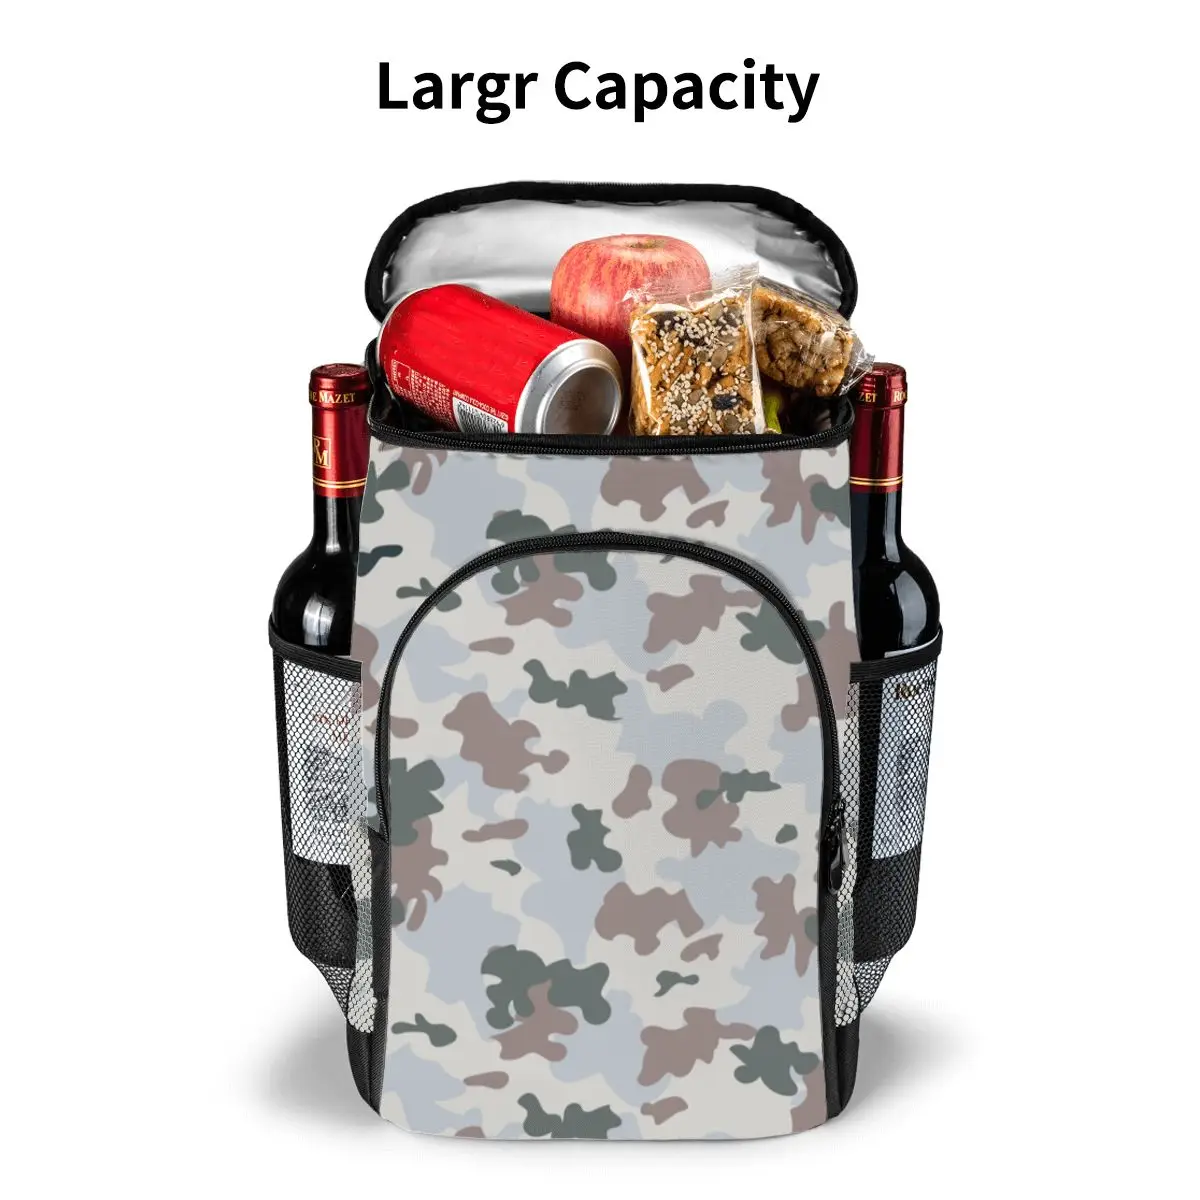 ohmelody camoflage insulation cooler backpack lunch bags for picnic party hiking camping beach diaper bags for mommy and baby free global shipping